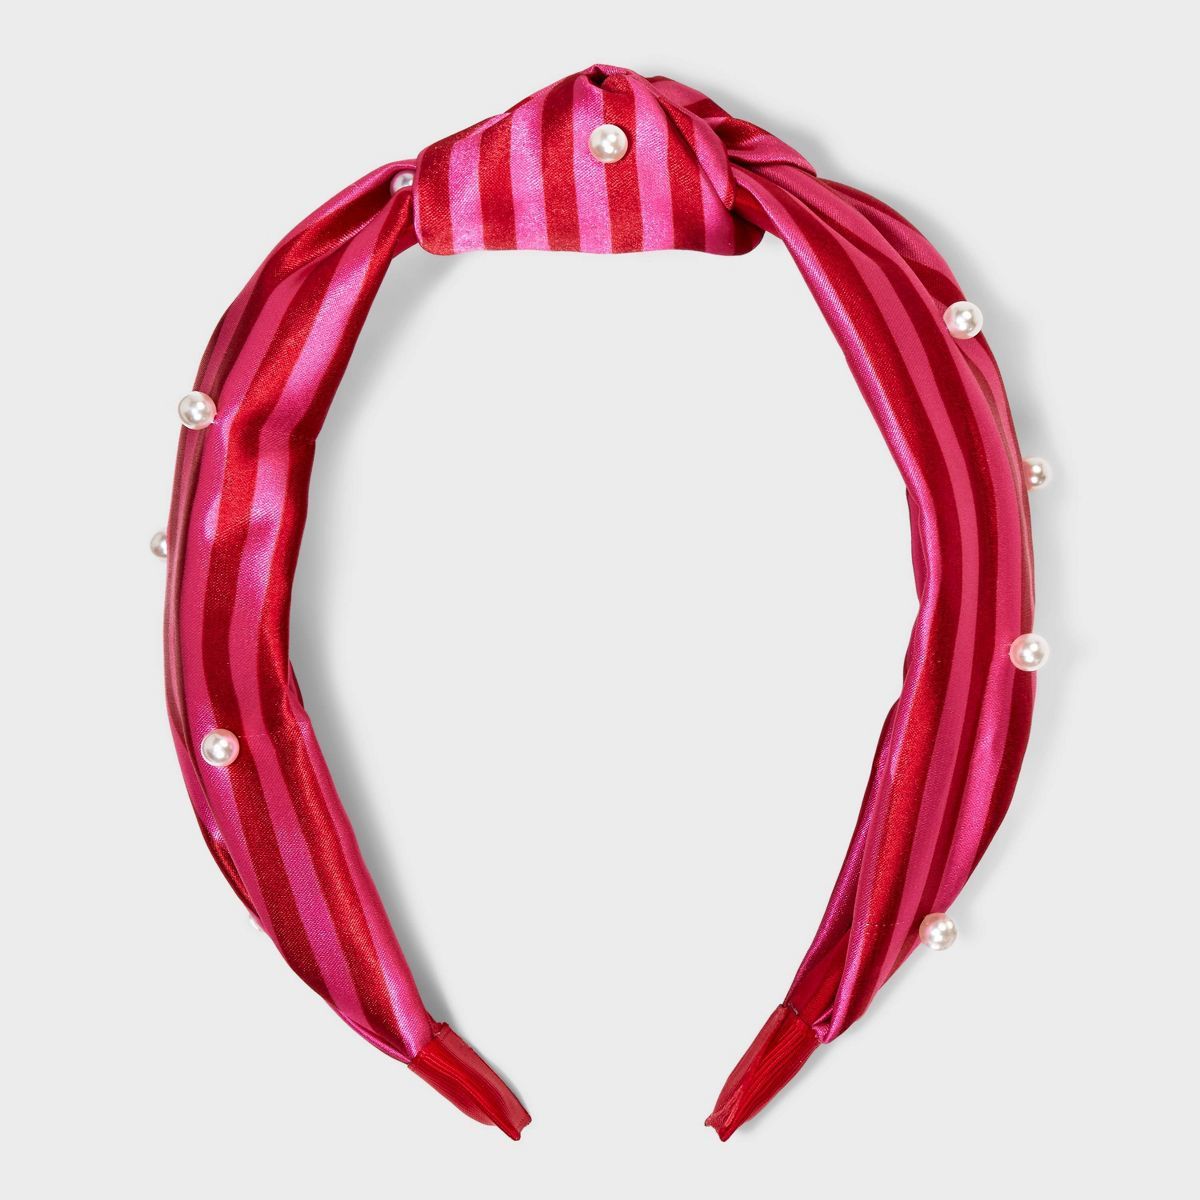 Satin Fabric Stripe Print with Pearls Knot Top Headband - A New Day™ Pink | Target